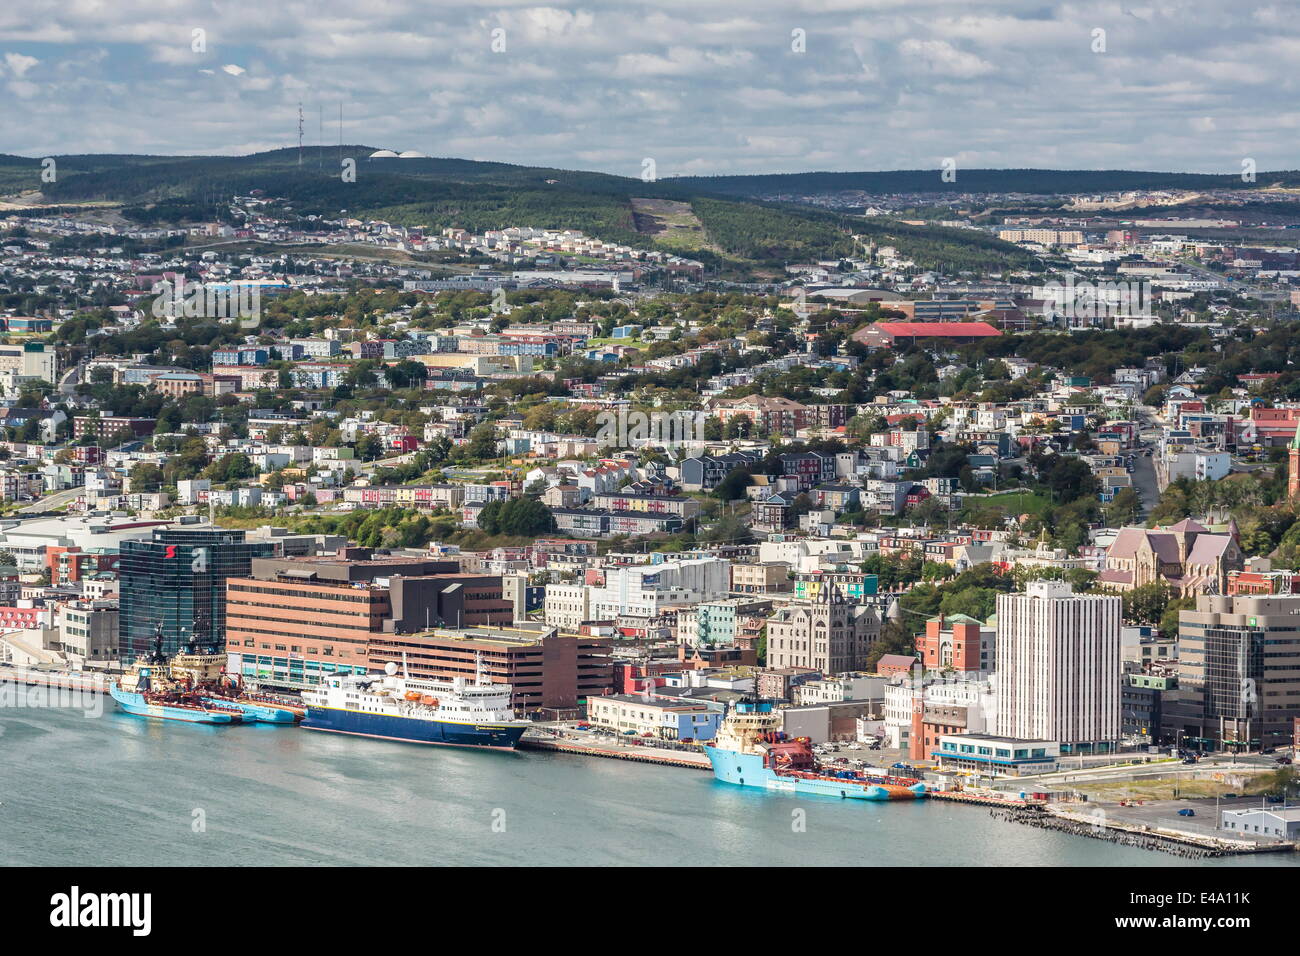 St. Johns Harbour and downtown area, St. John's, Newfoundland, Canada, North America Stock Photo